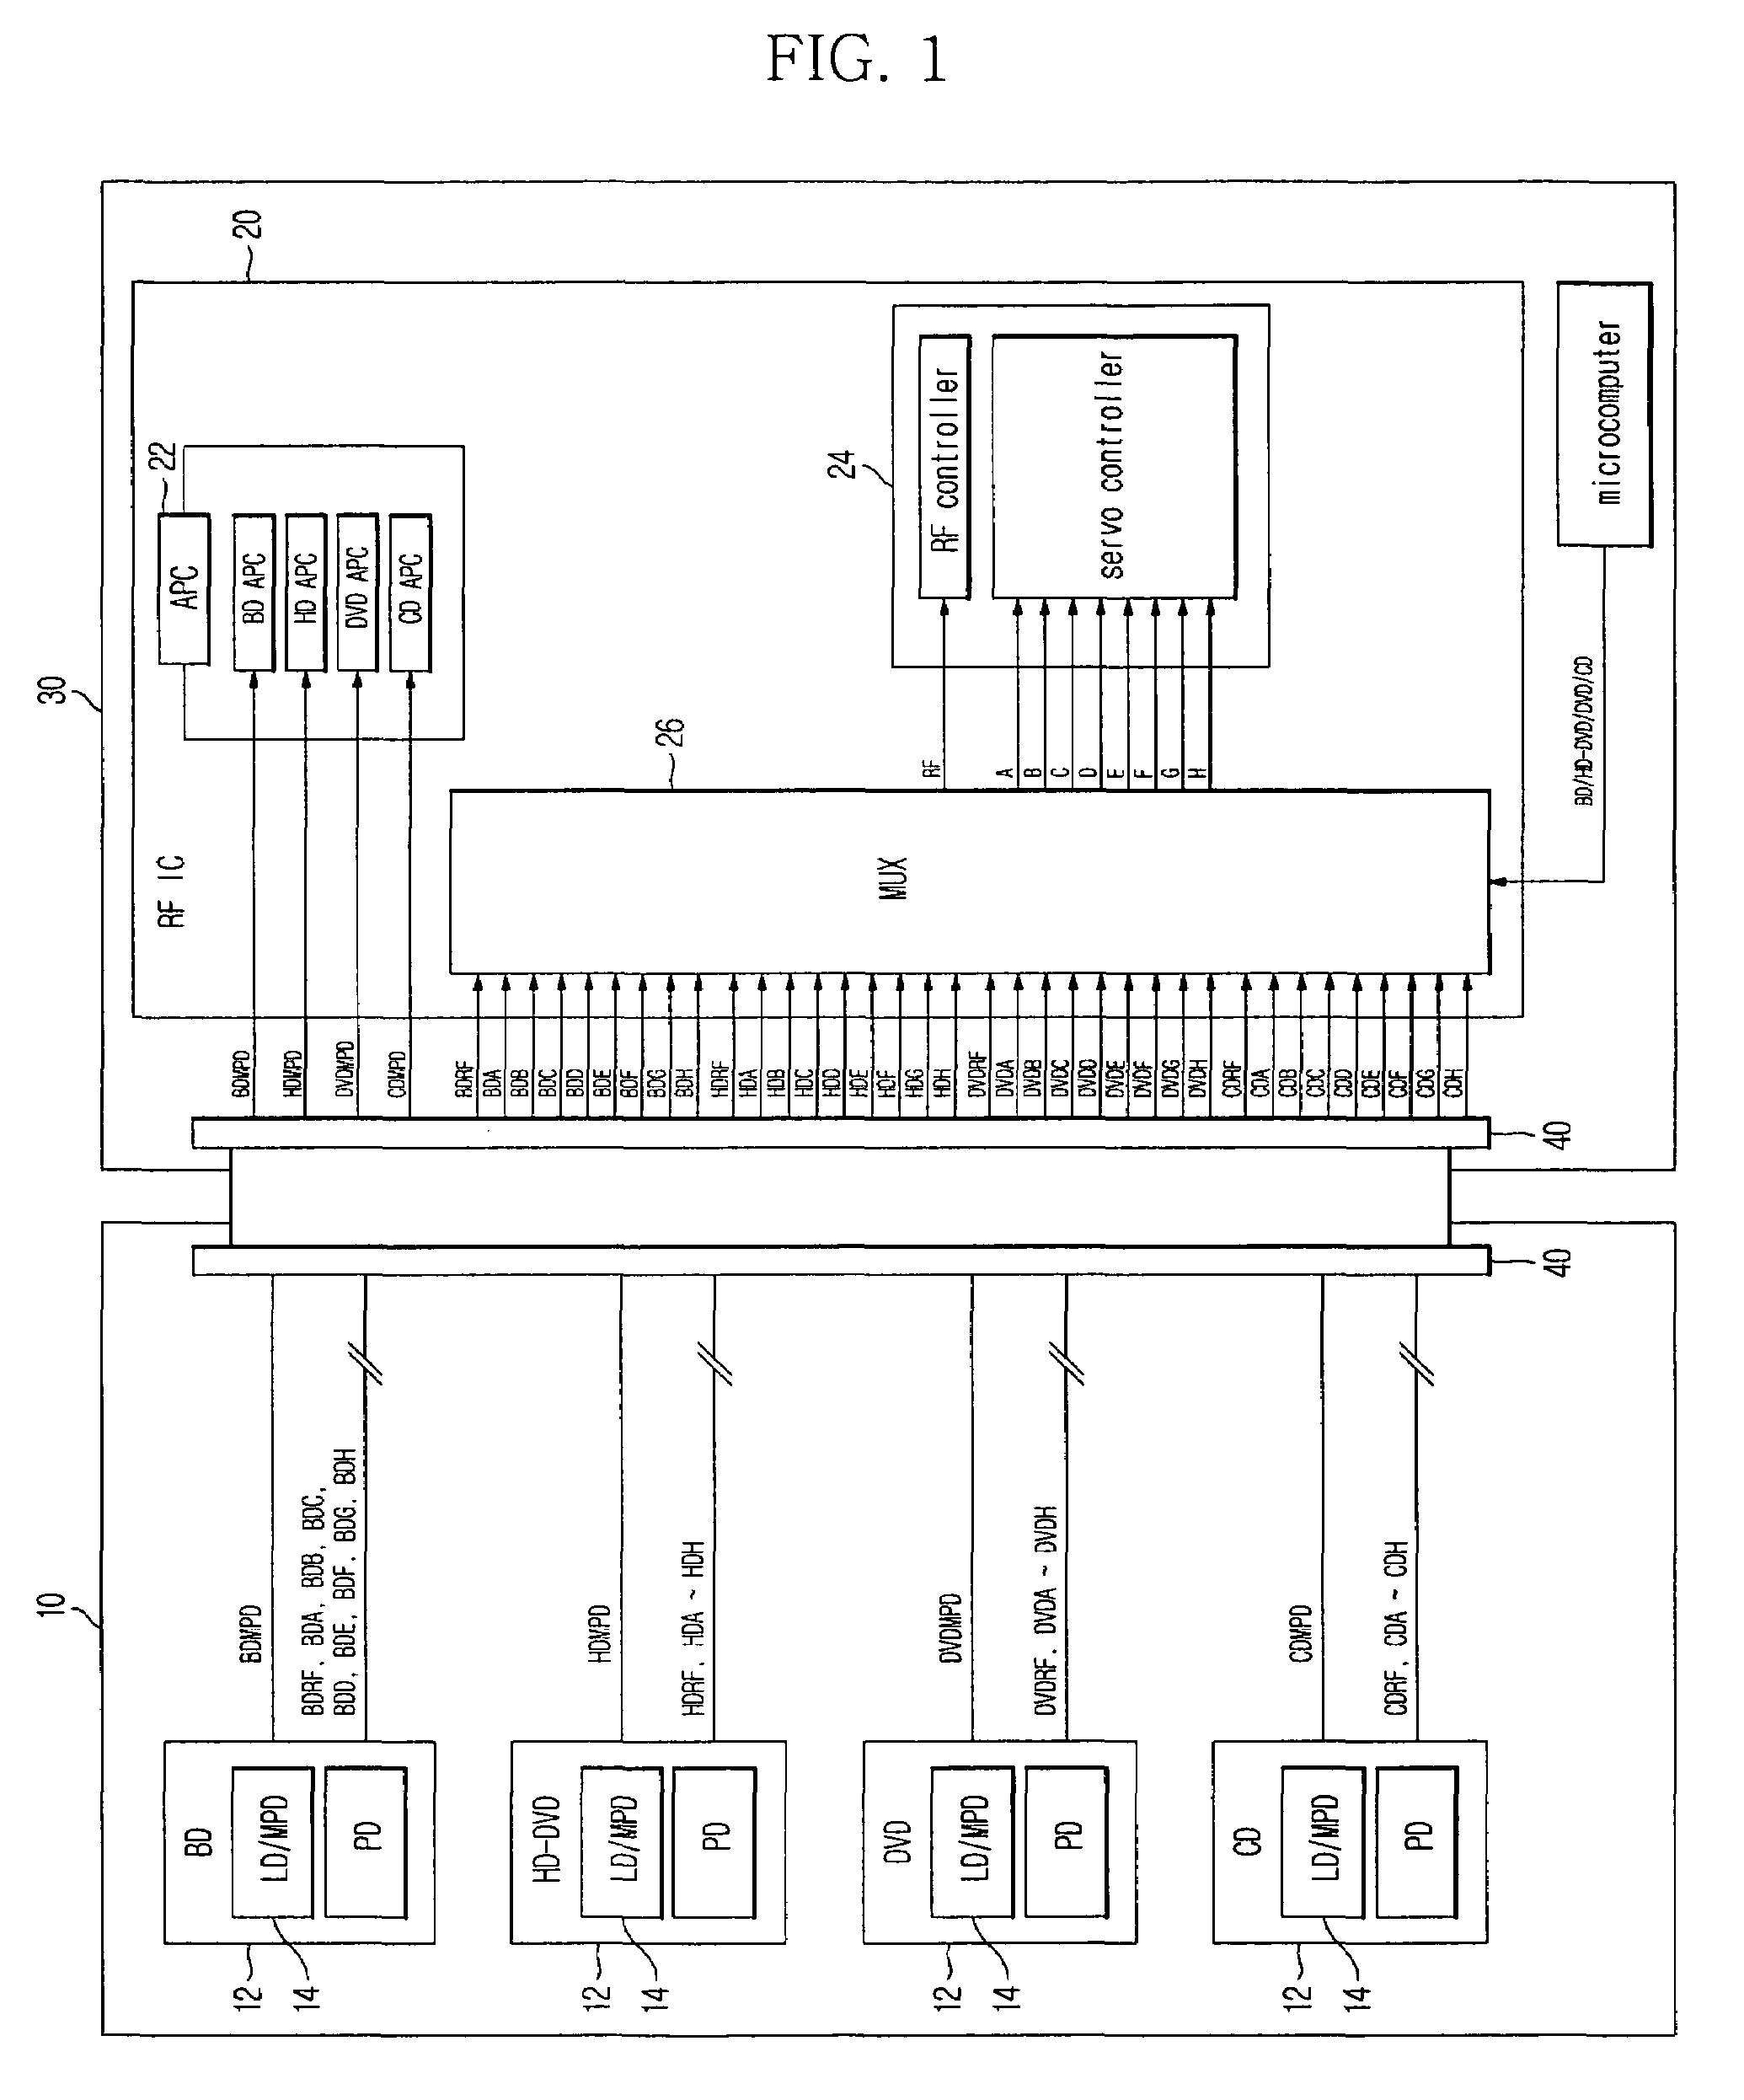 Interface device for optical recording and/or reproducing apparatus